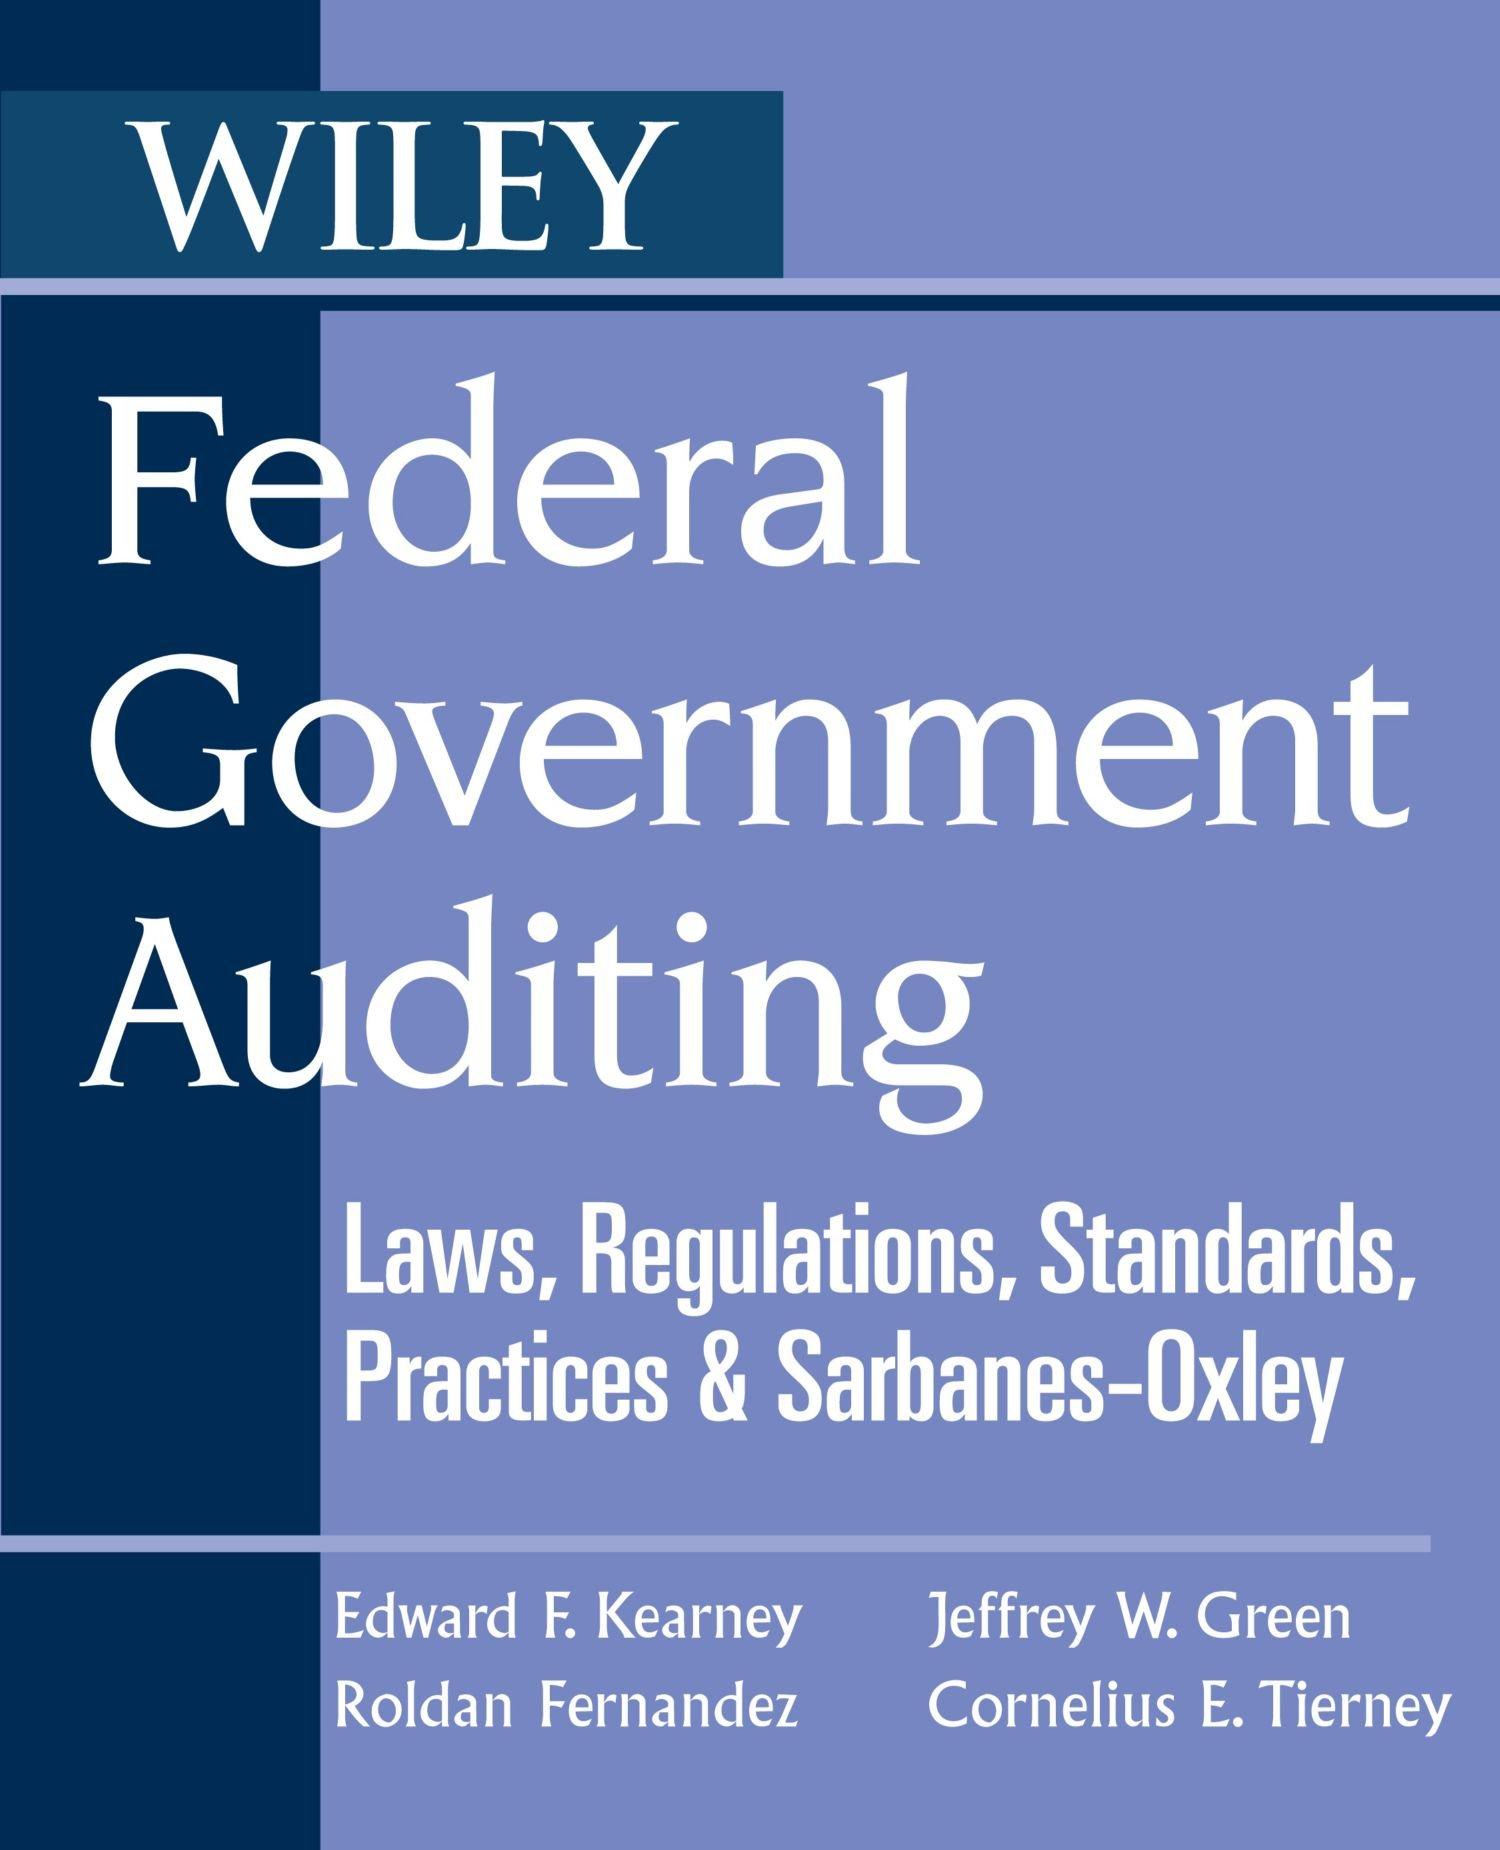 wiley federal government auditing laws regulations standards practices and sarbanes oxley 1st edition